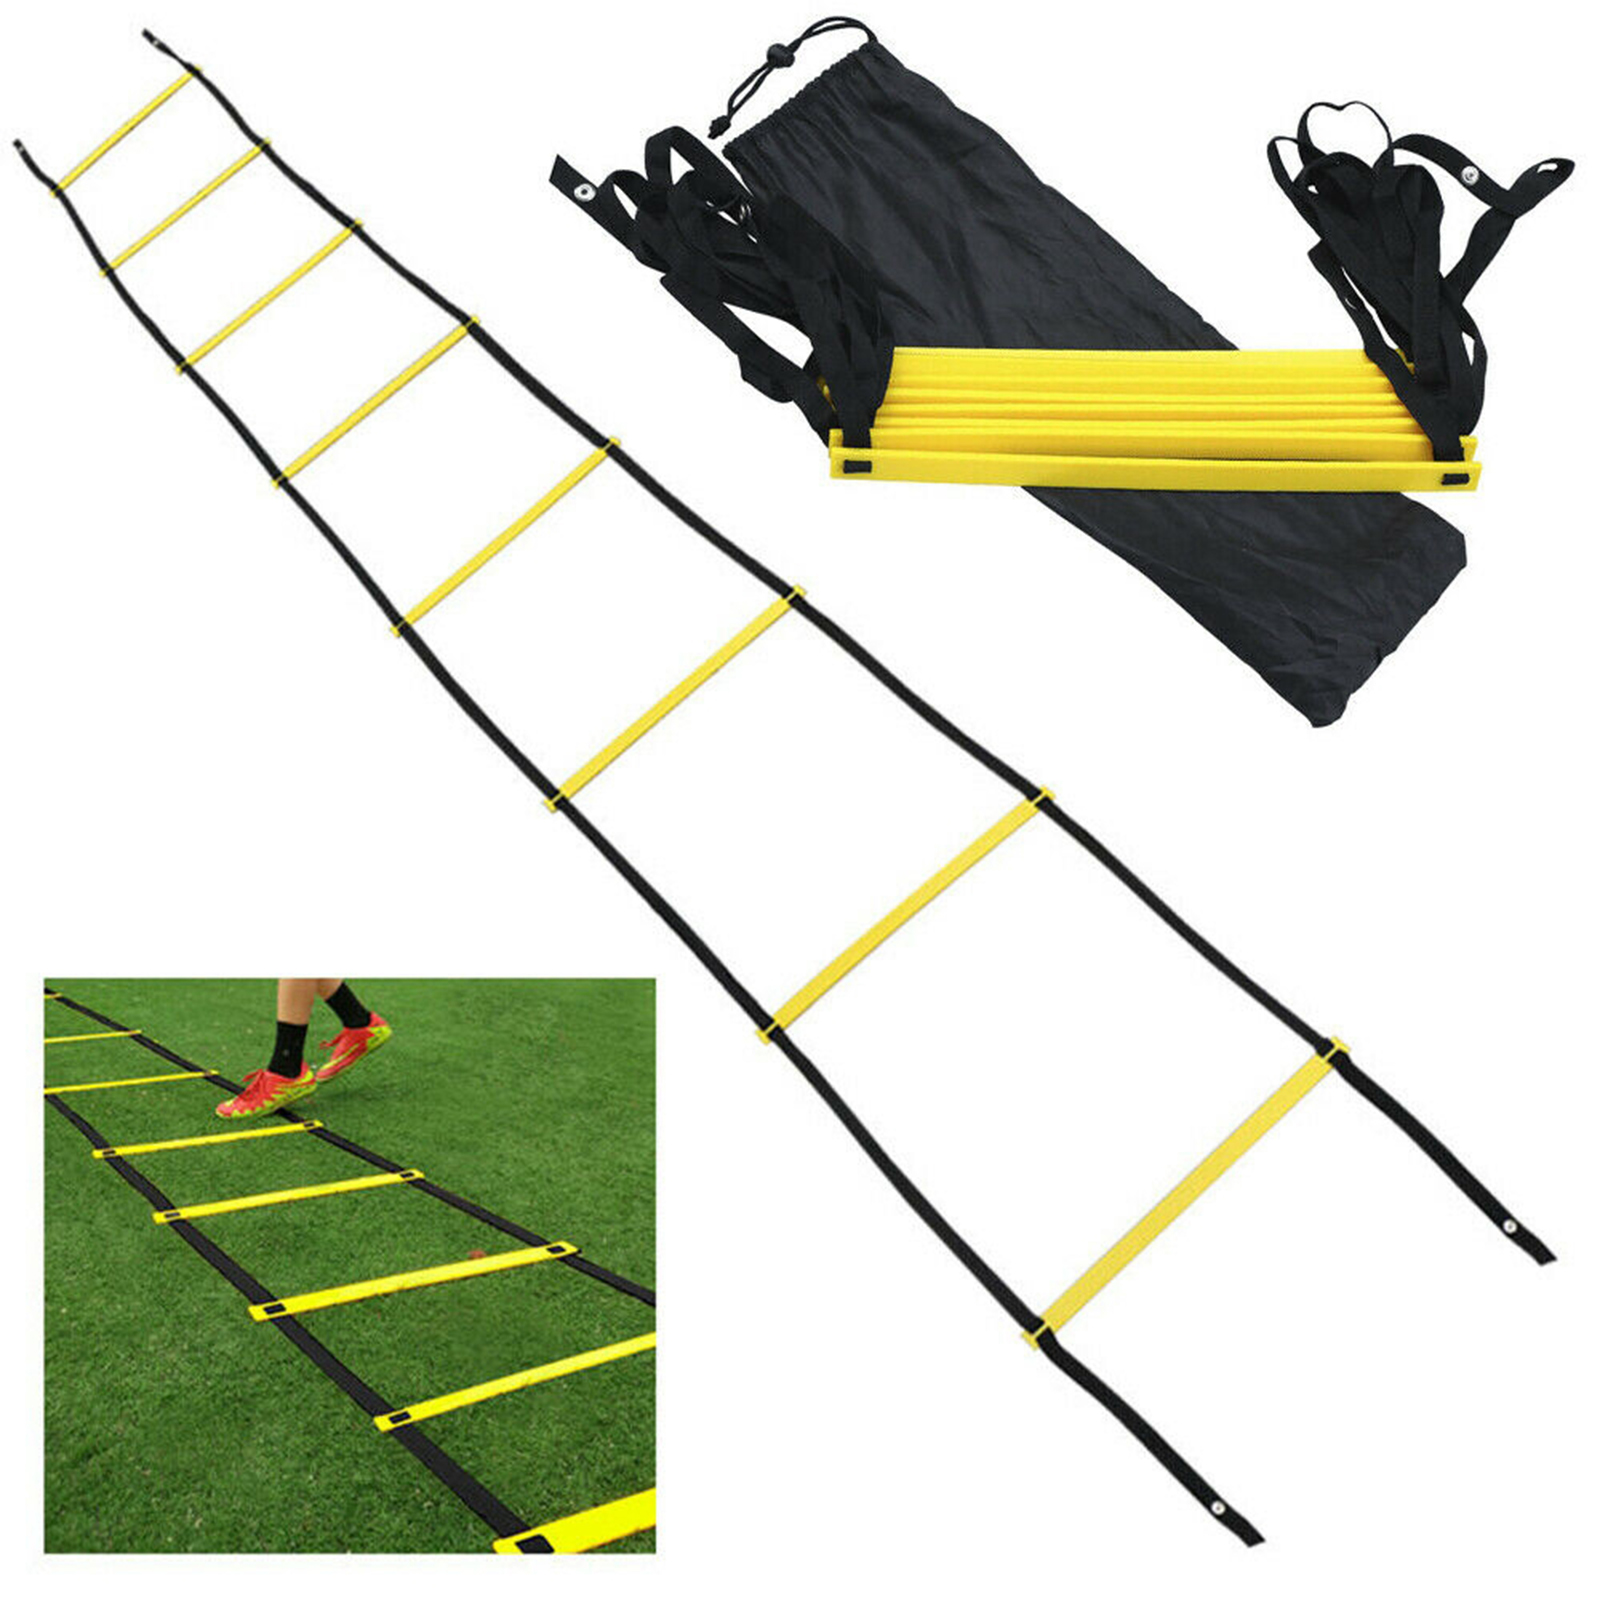 BolehDeals Speed Training Ladder Agility Footwork Football Exercise Workout 4M 8Joint